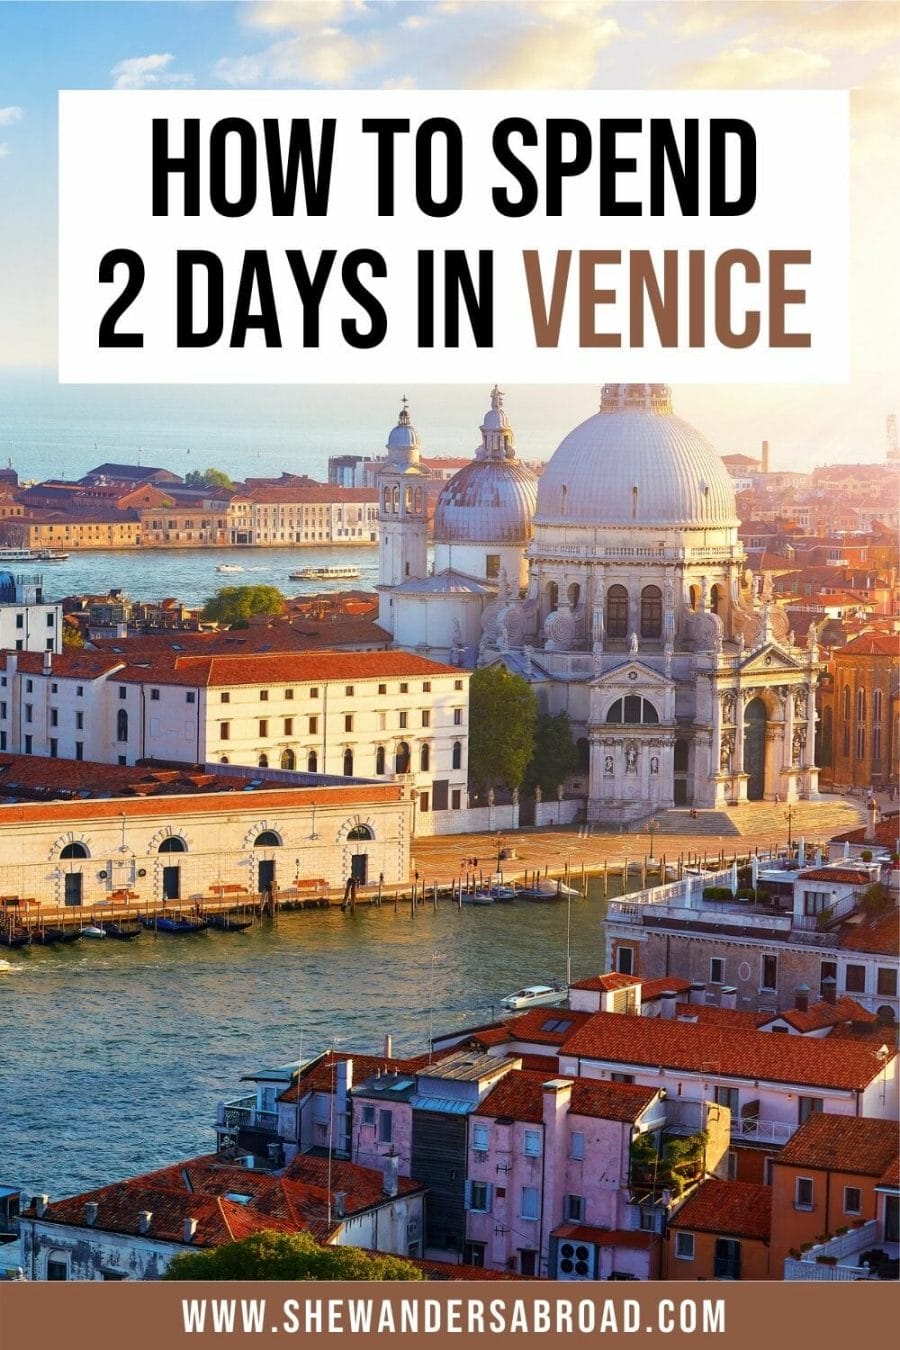 The Perfect 2 Day Venice Itinerary: How to Spend 2 Days in Venice